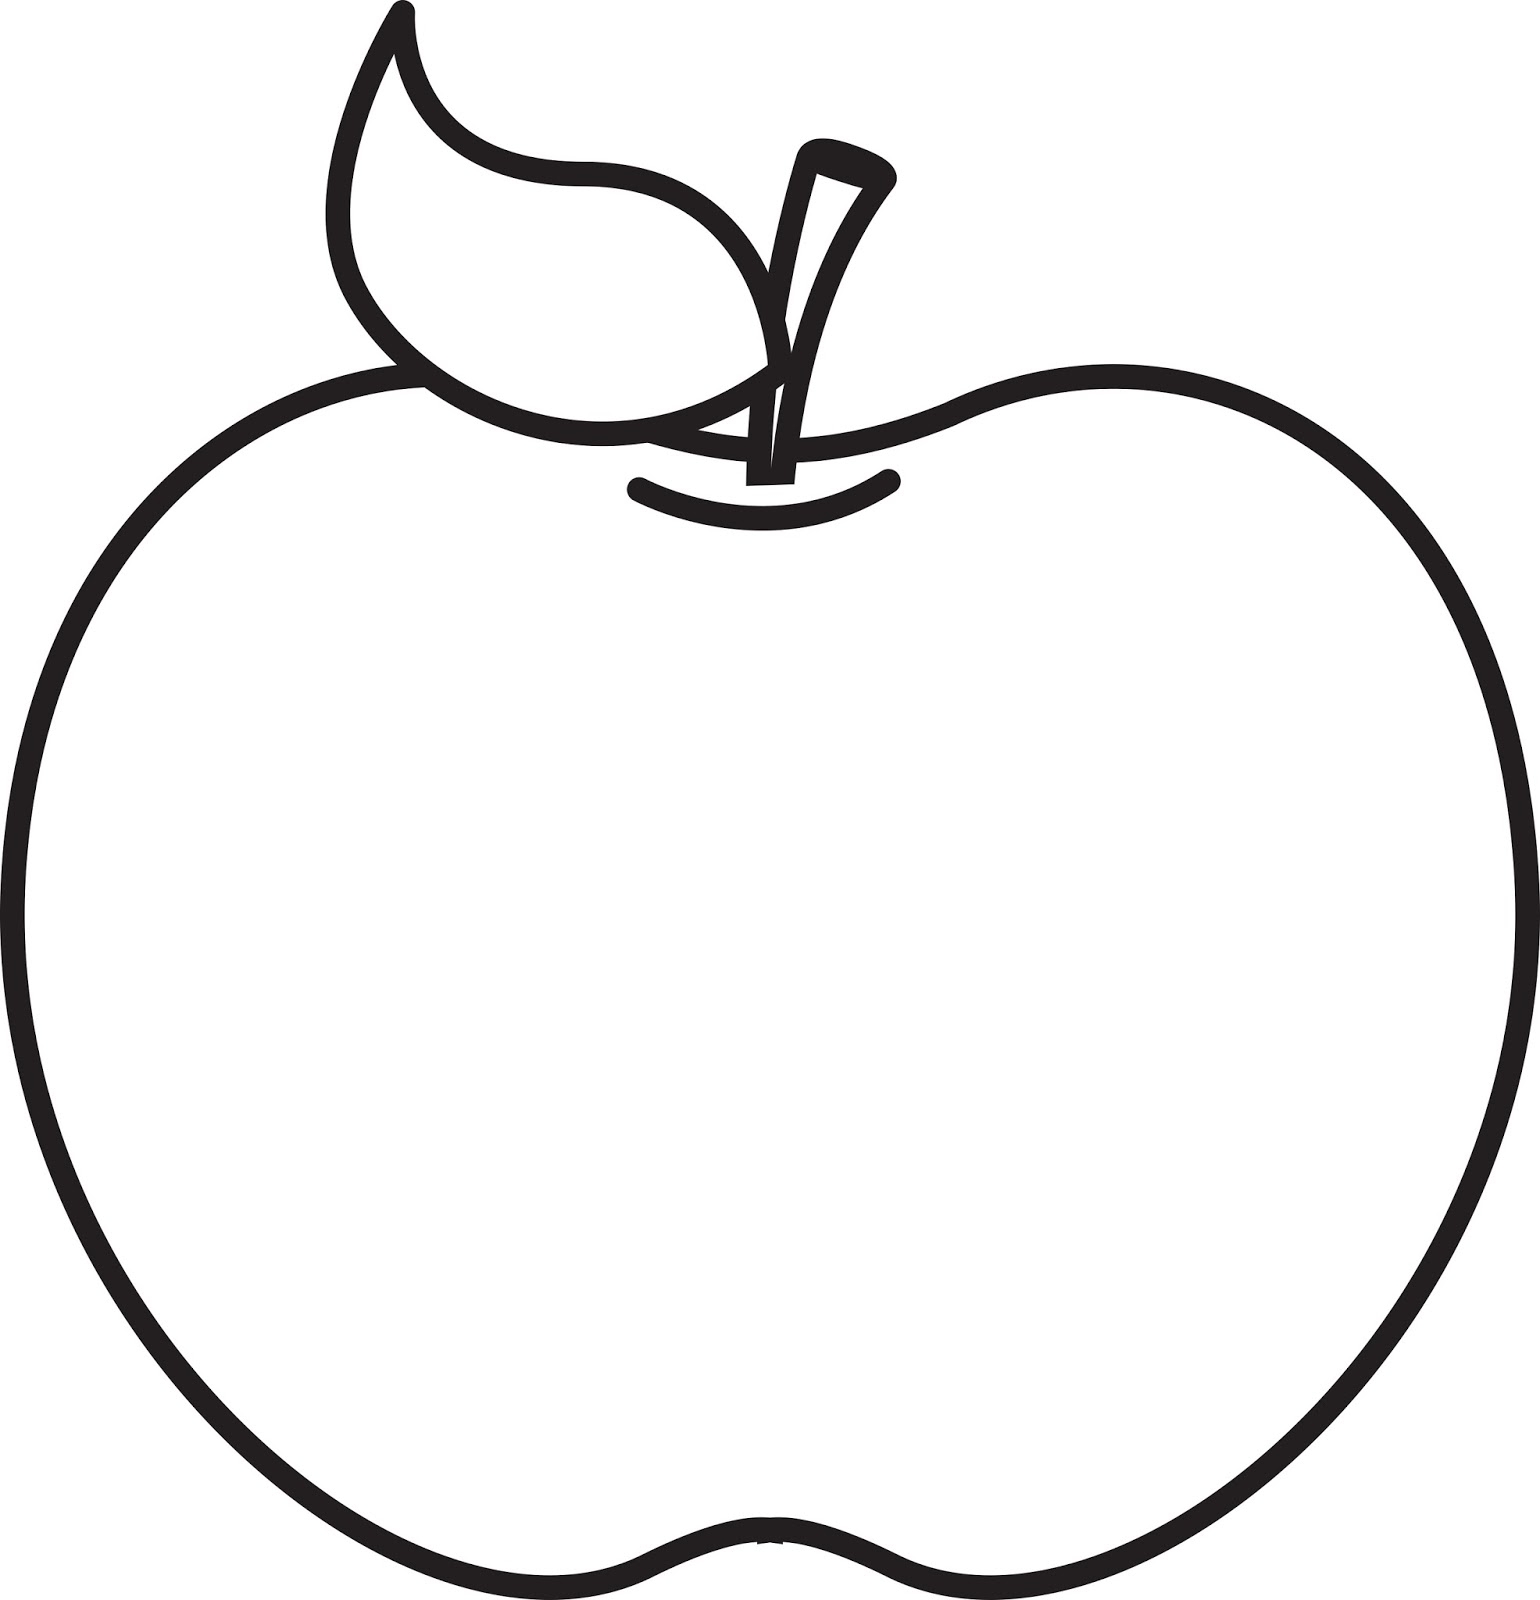 apple clipart images apple clipart black and white apple clipart.